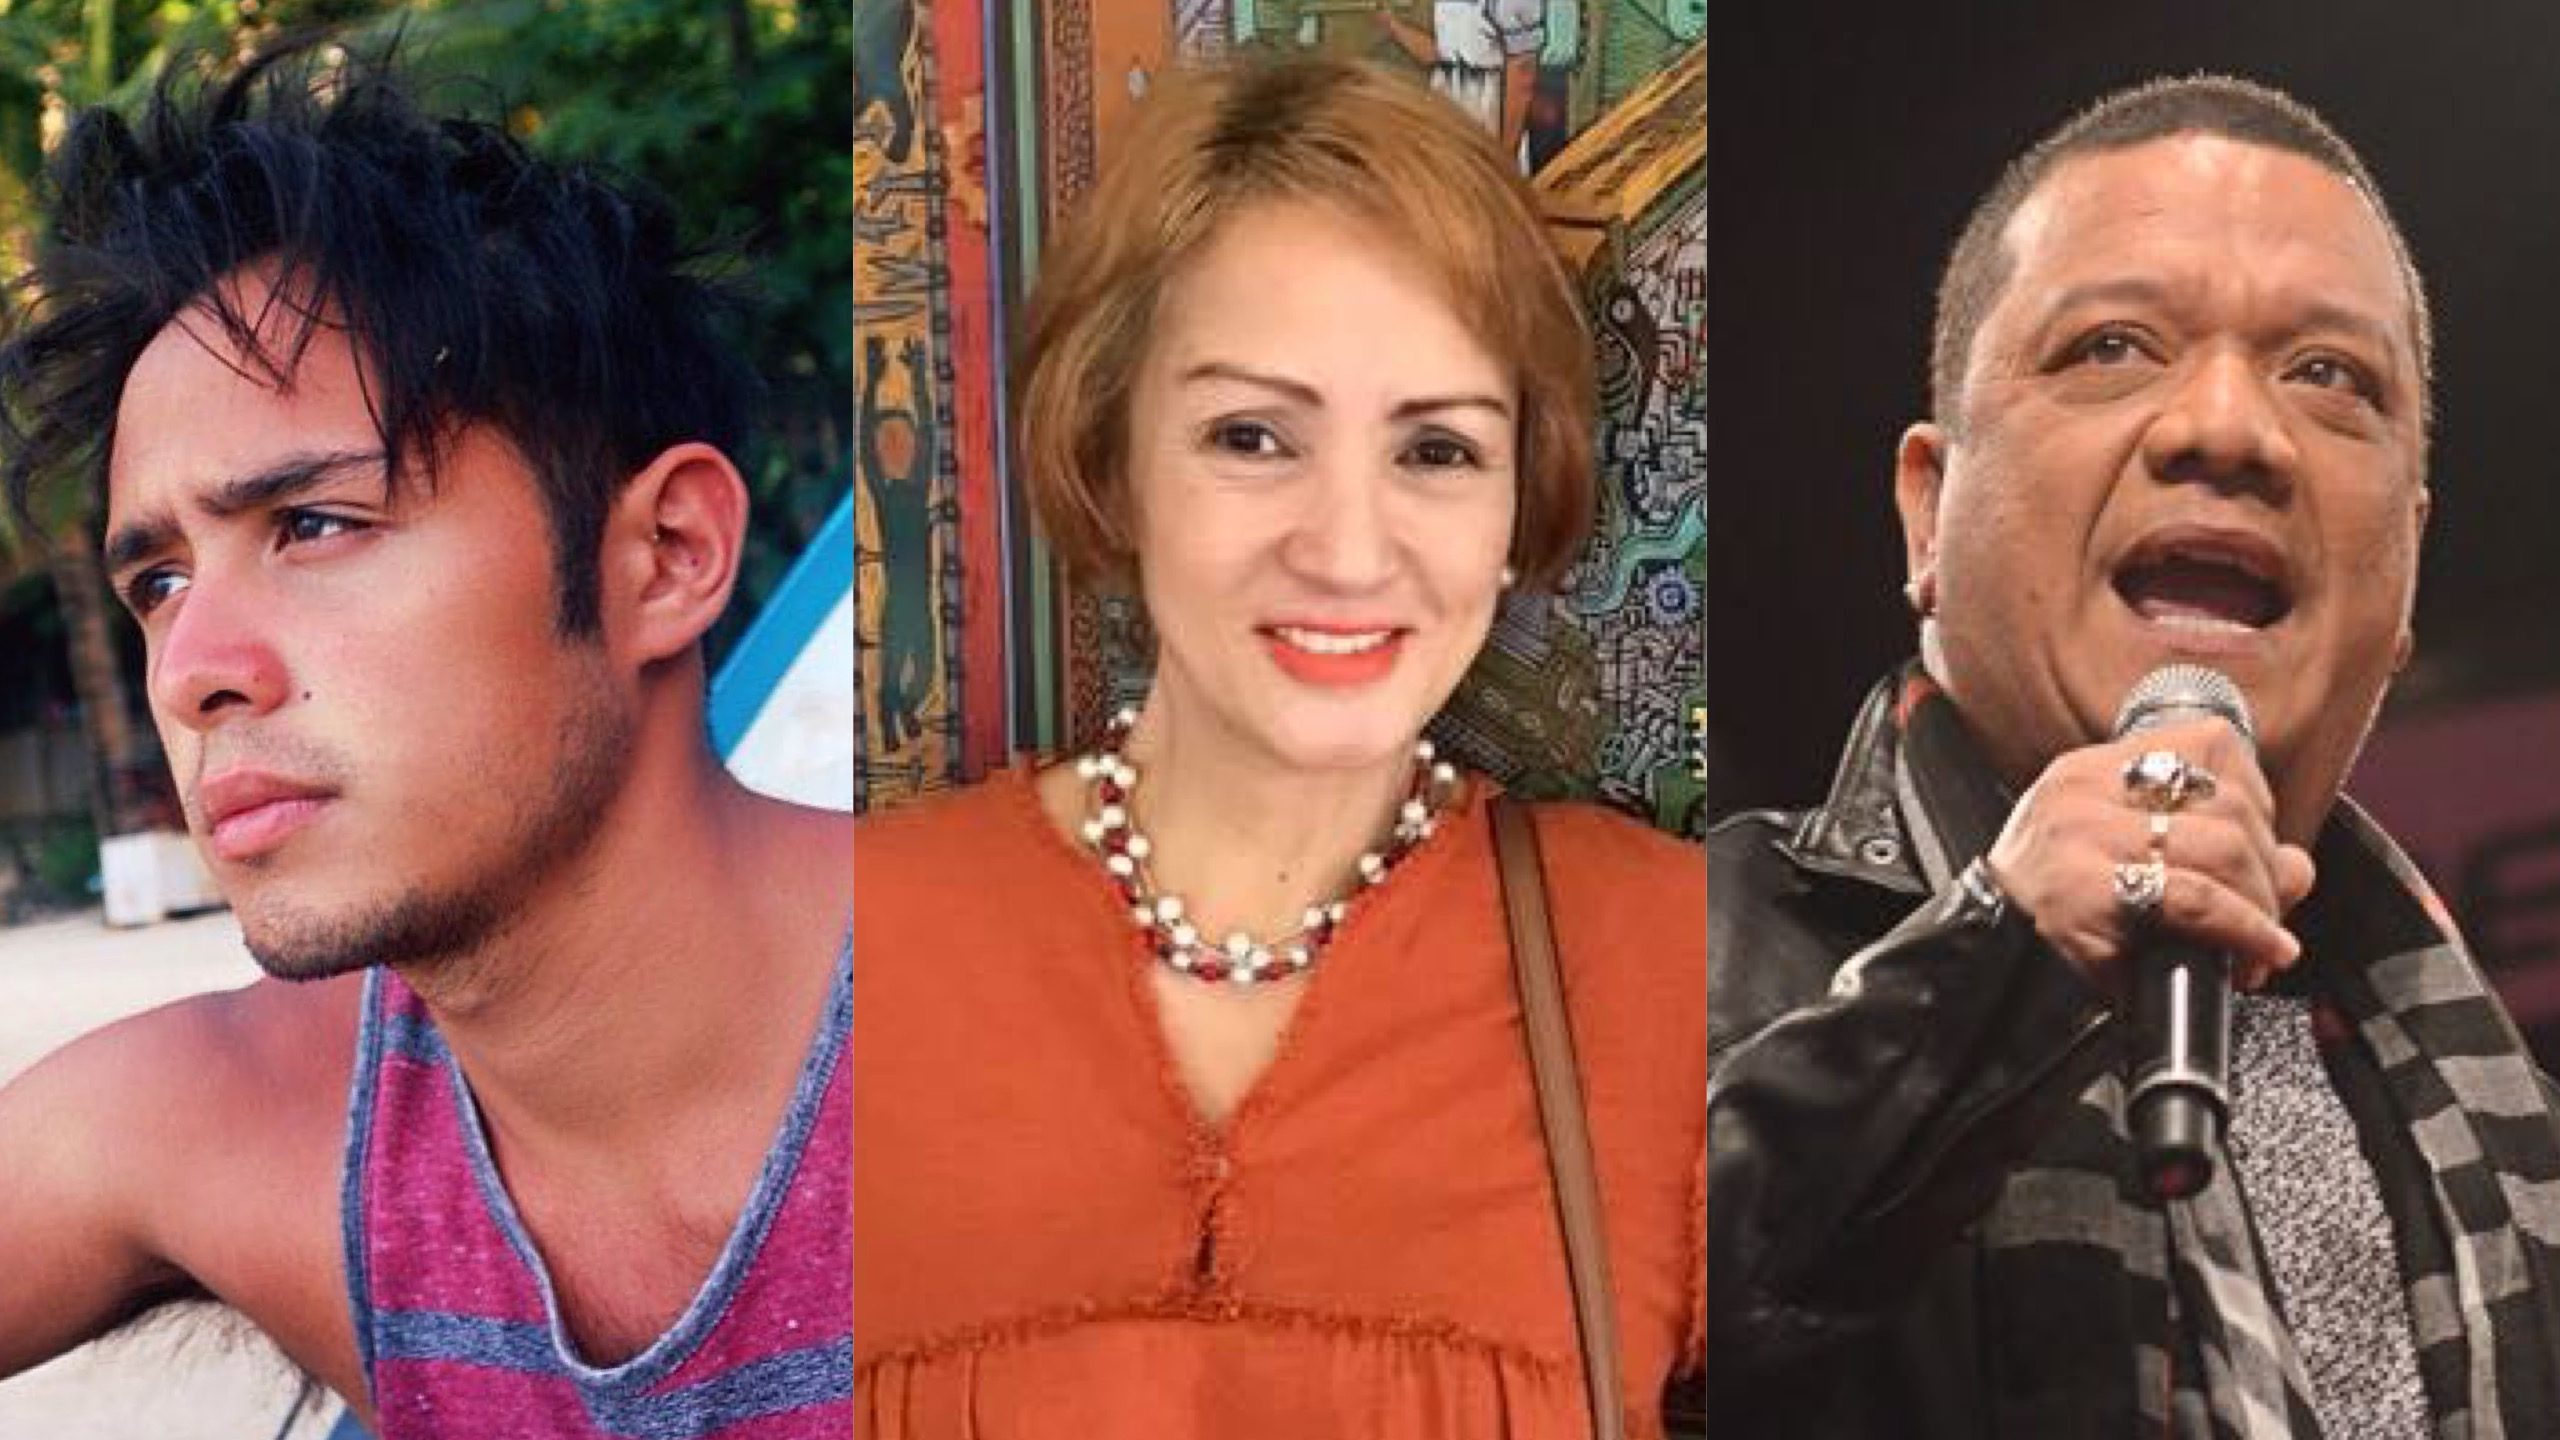 These stars were at Resorts World Manila during the attack